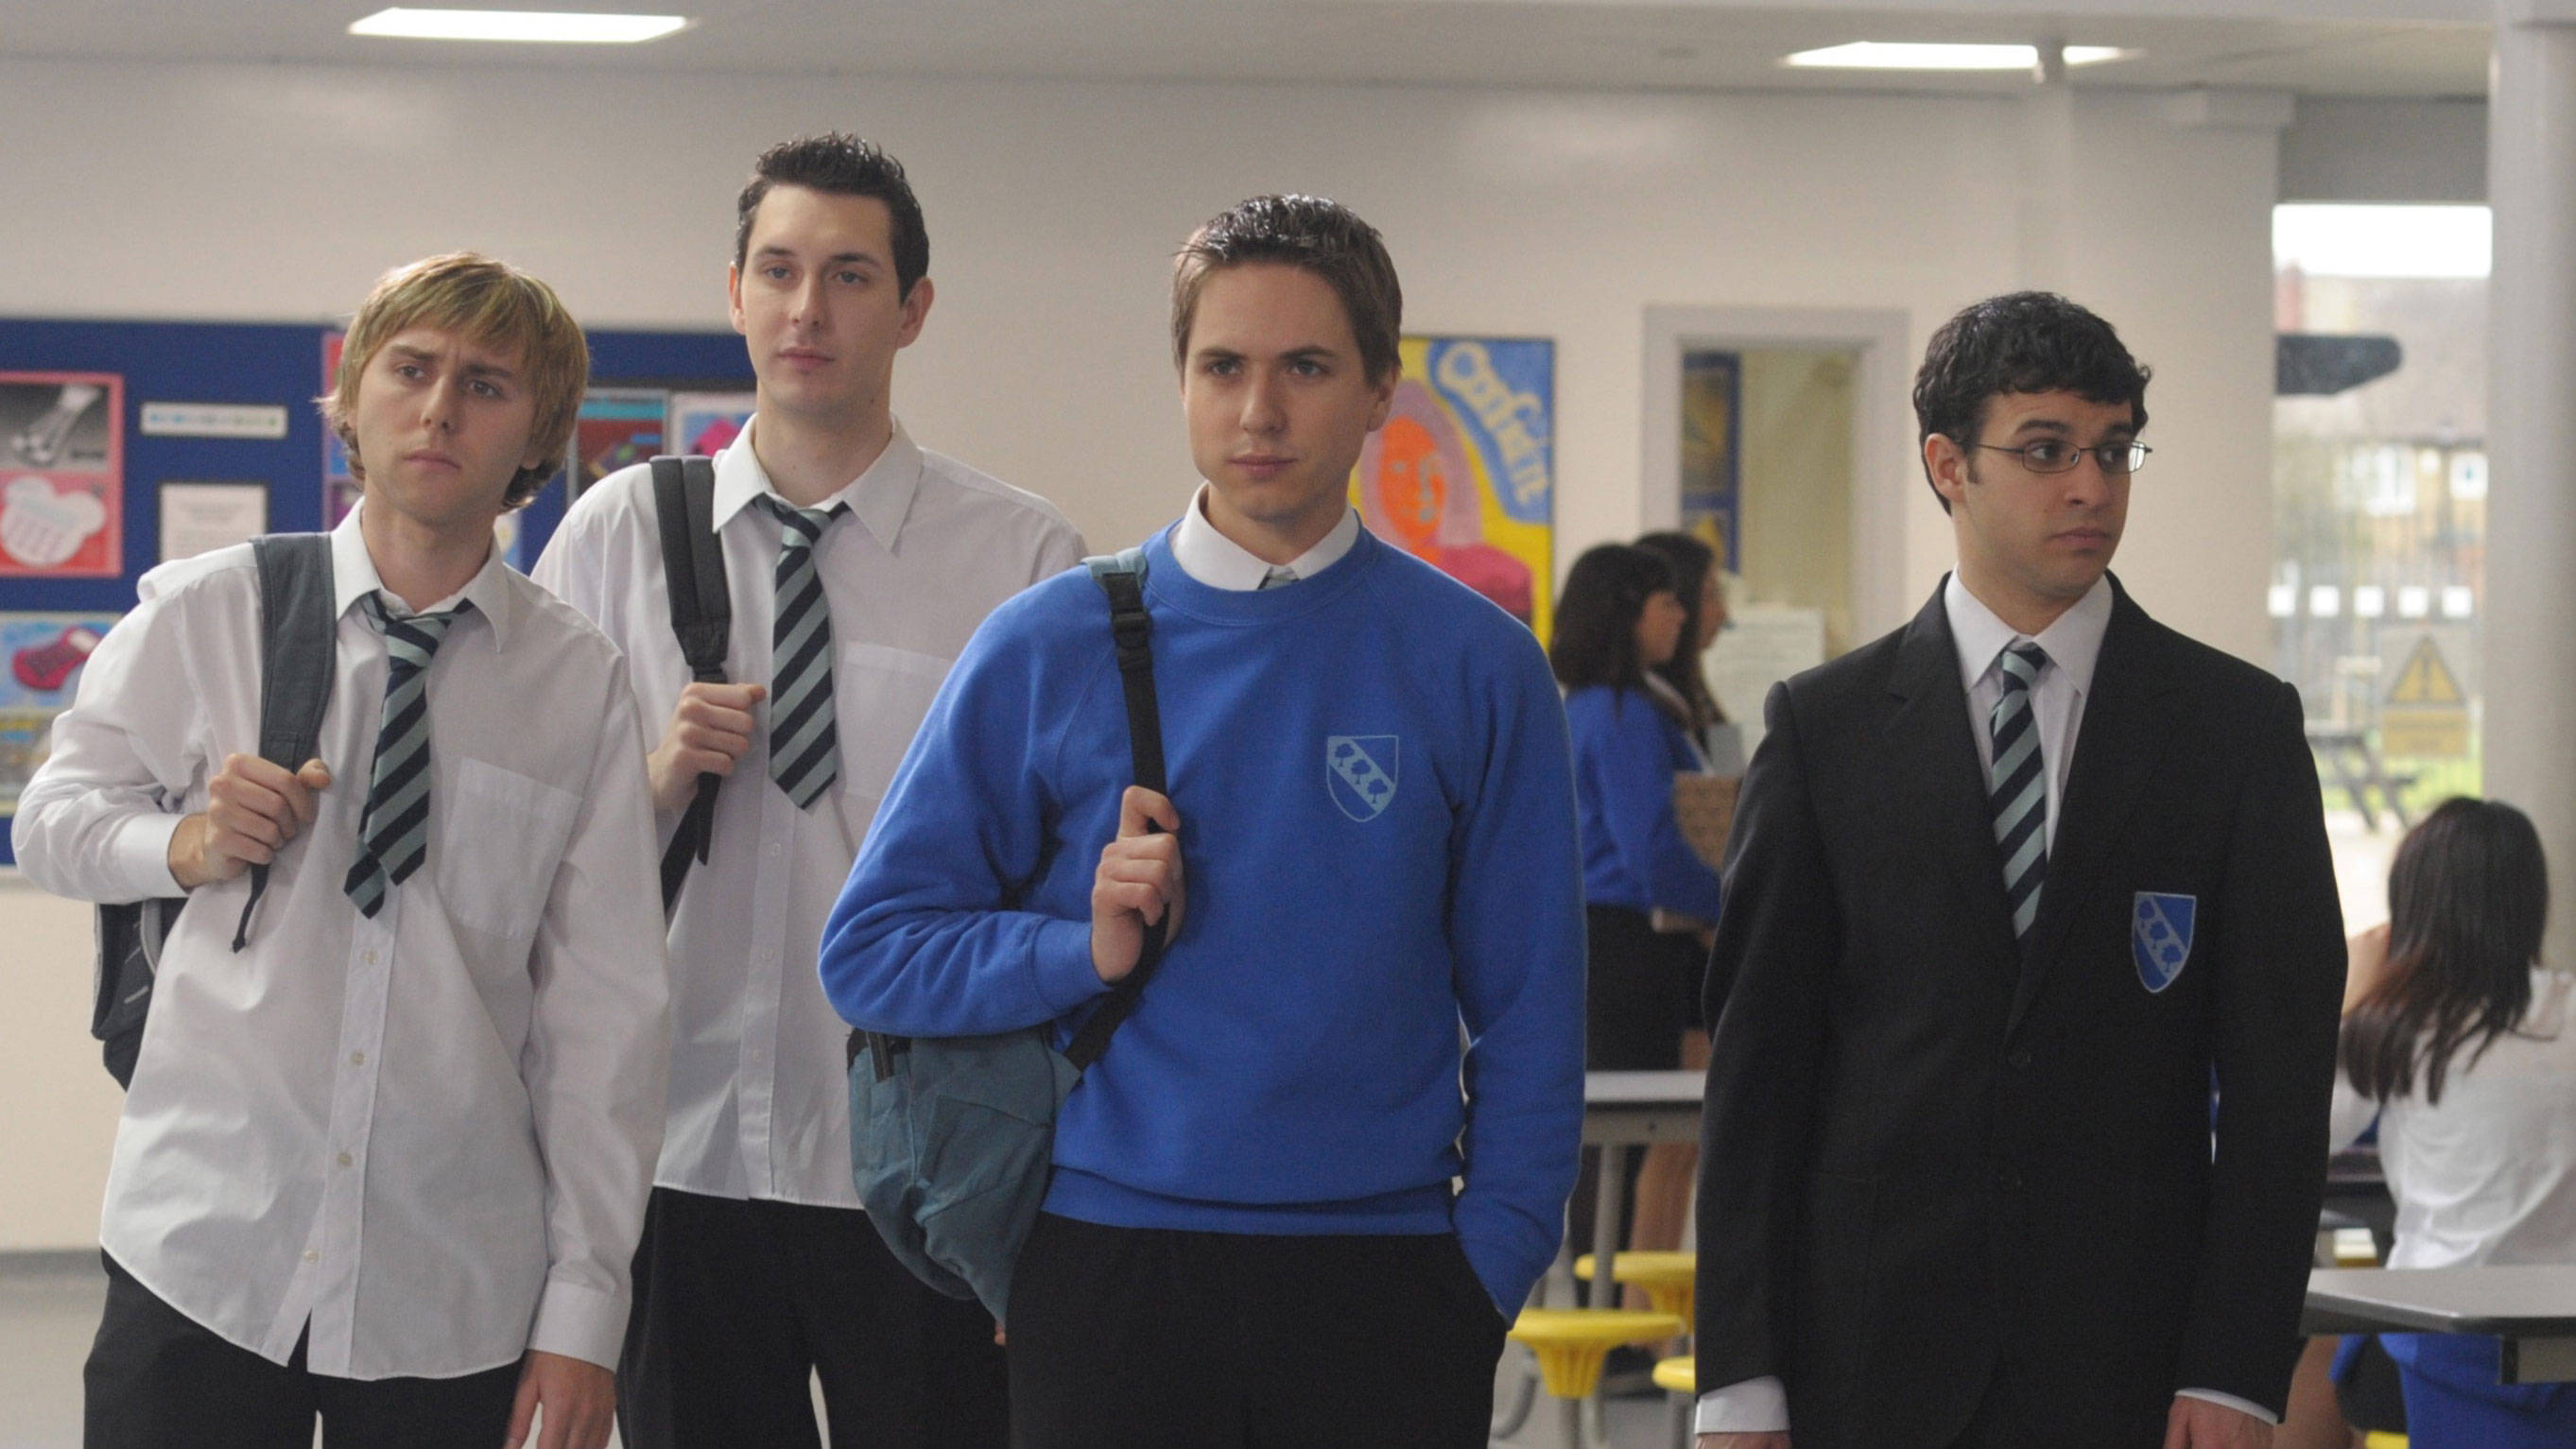 2. The Inbetweeners: A classic British sitcom showing Secondary school life in Britain. Since it's a UK high school, it came with many jokes on homophobia, sexism, and ableism, and every type of harsh stereotype one could think of. Nevertheless, it depicted how the real world was at that time.